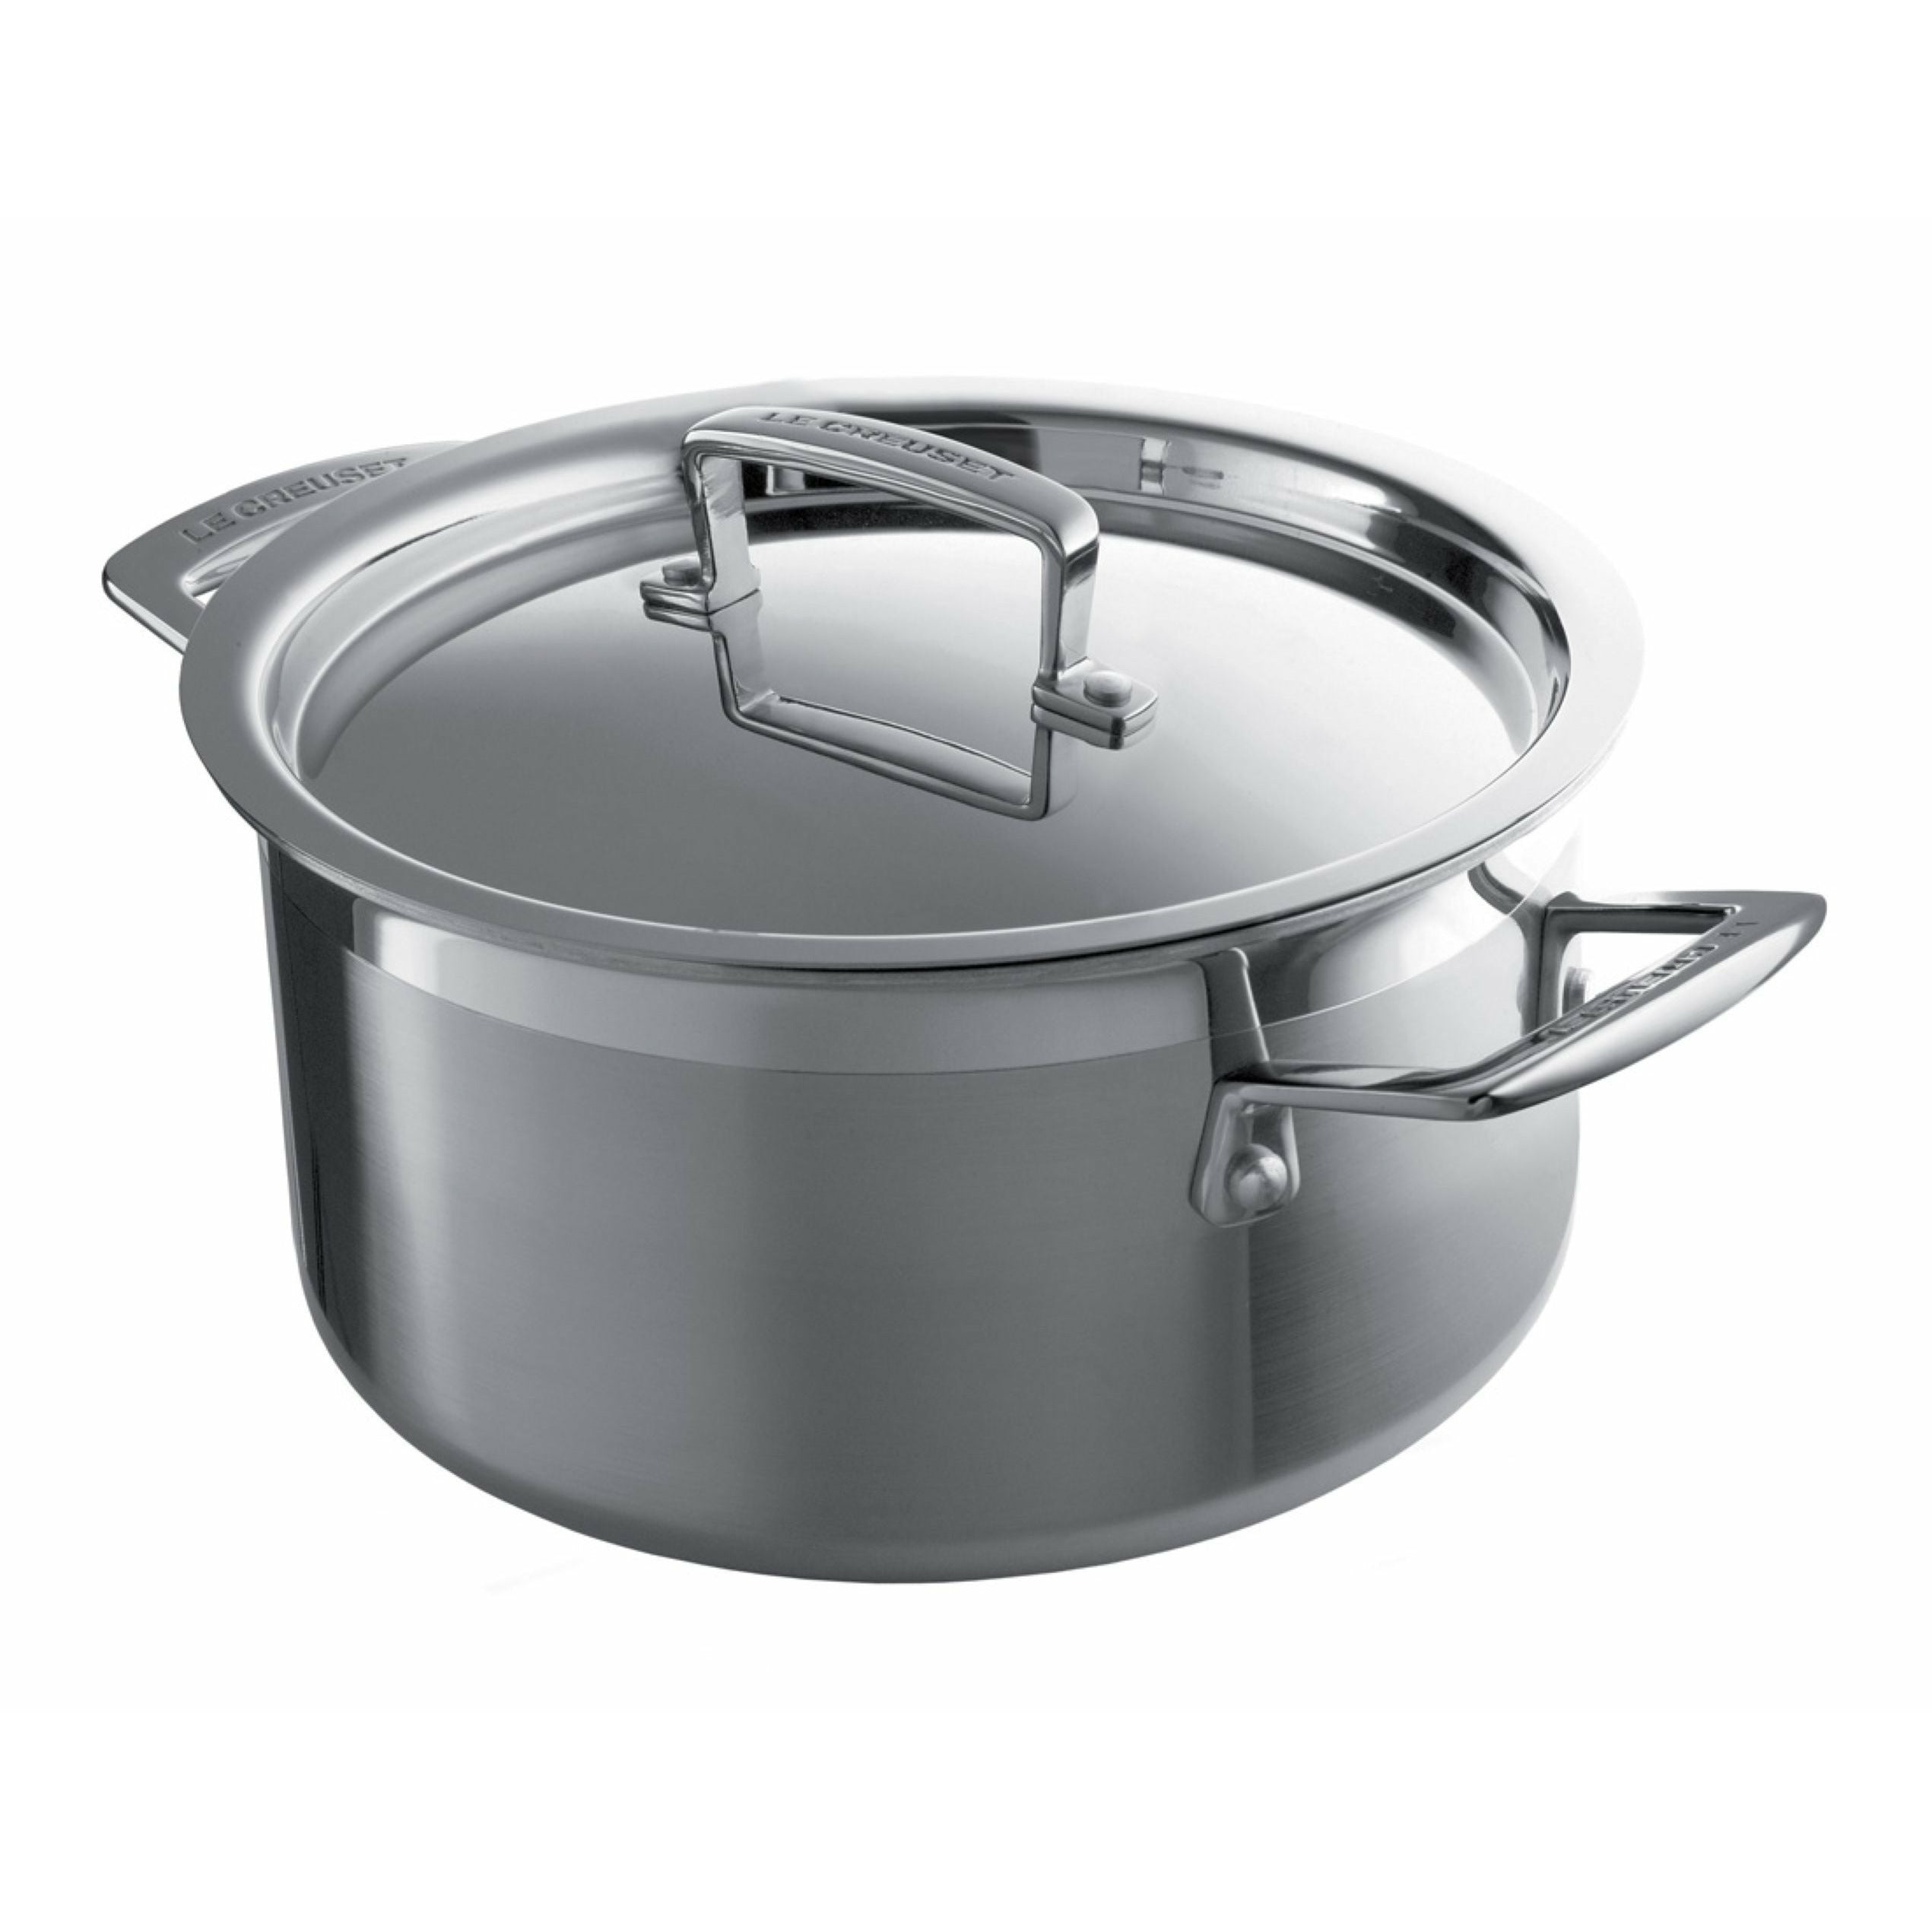 Le Creuset 3 Ply Stainless Steel Casserole With Lid 5.3 L, 24 Cm